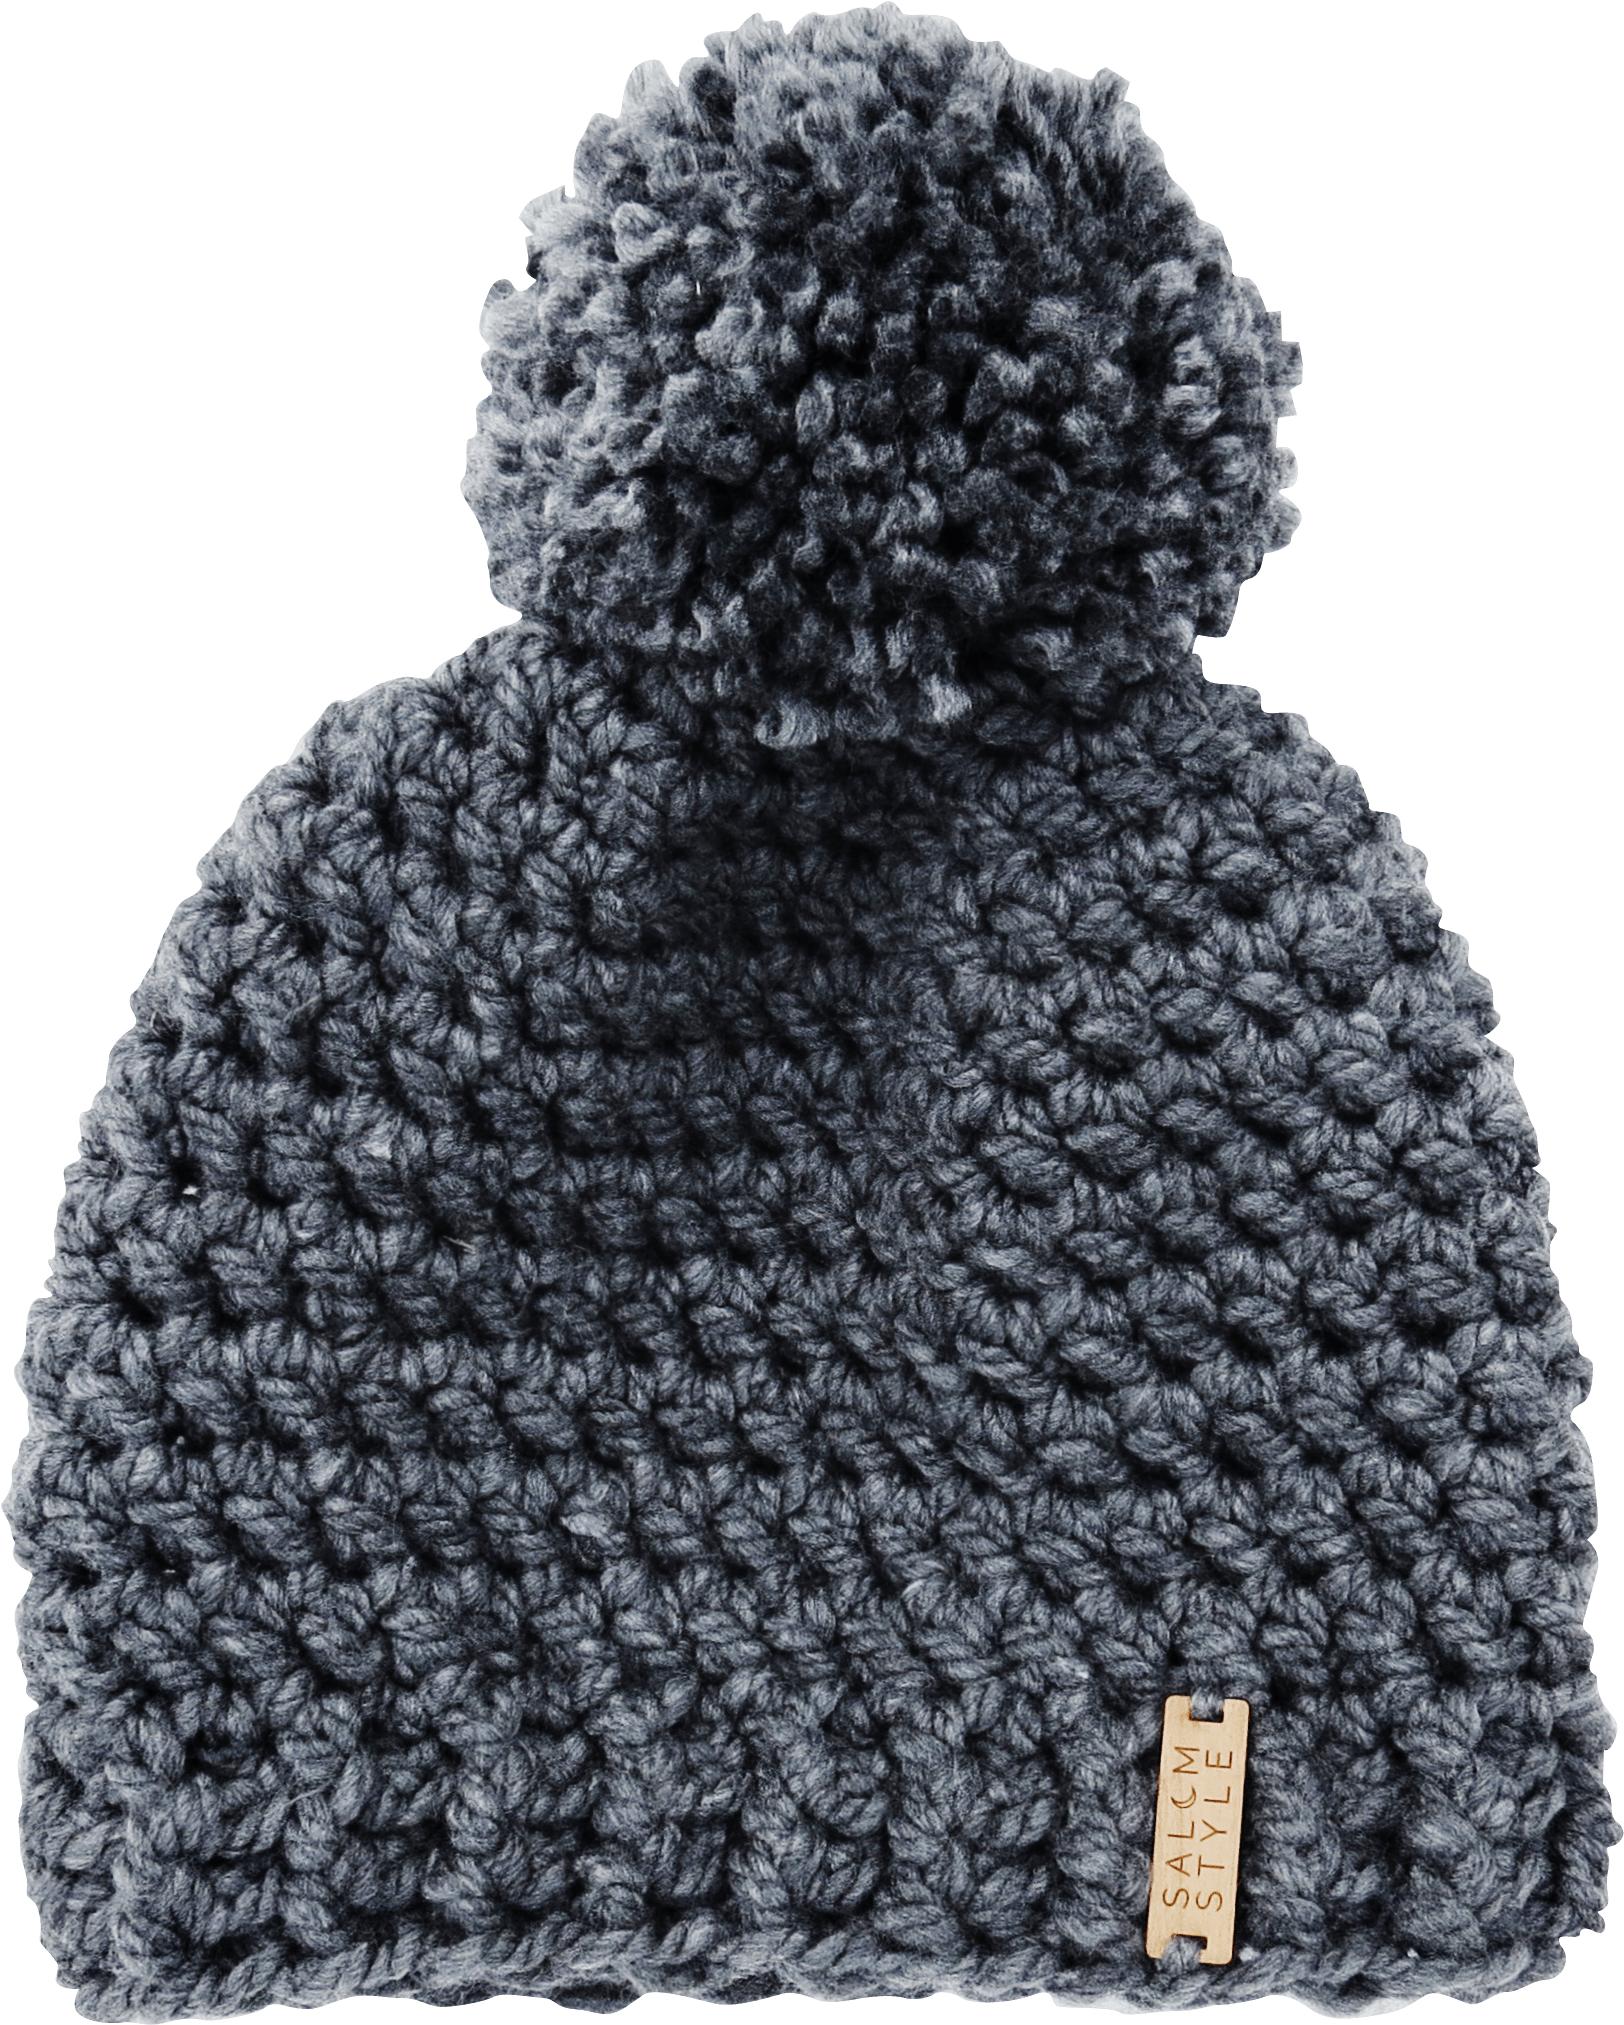 Knitted Hat Winter Free HQ Image PNG Image